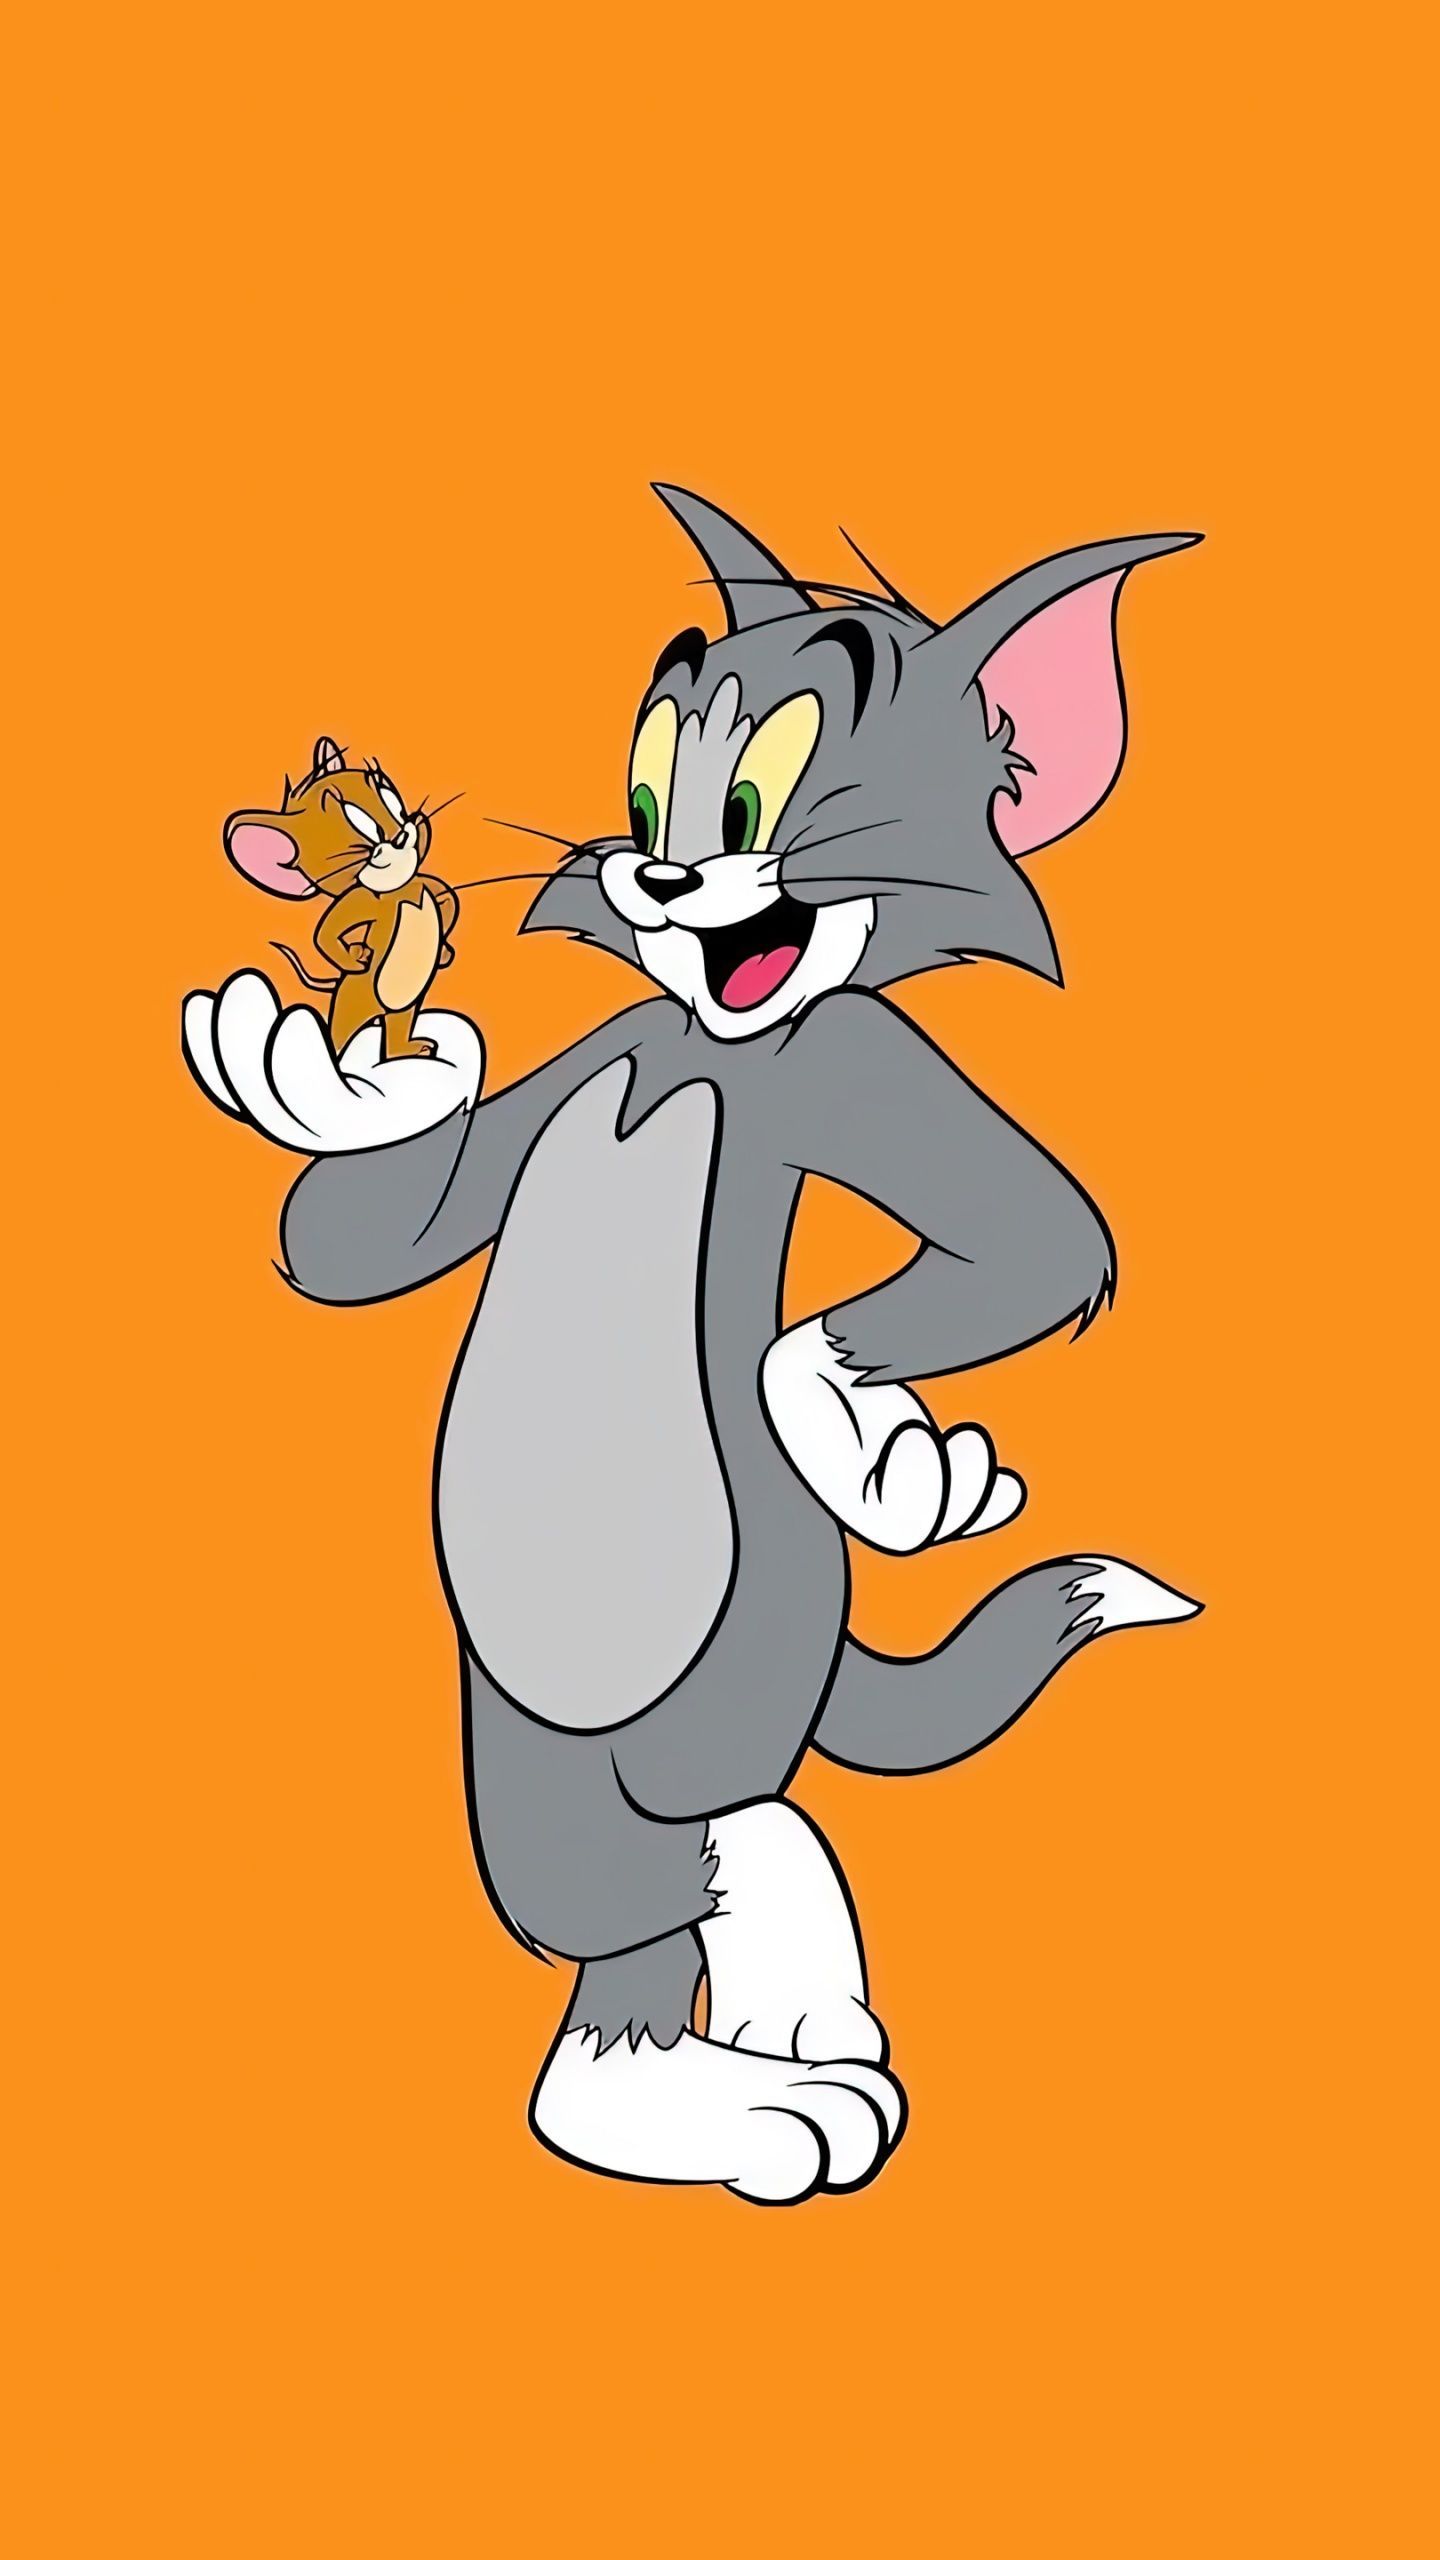 Tom and jerry cartoon character on an orange background - Tom and Jerry